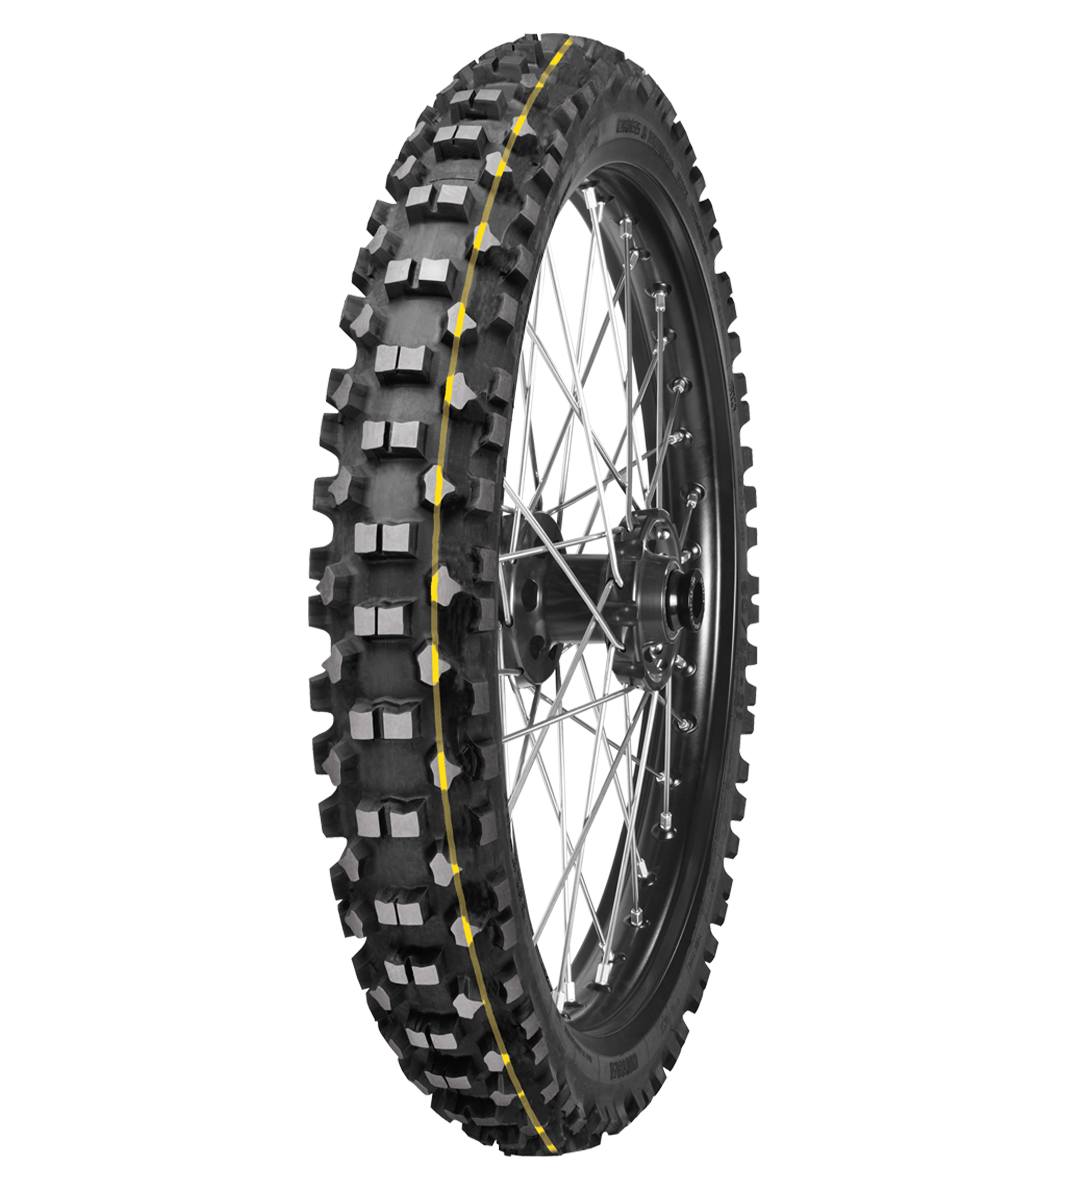 Mitas C-21 STONE KING 90/90-21 Rally Off-Road SUPER 54R Yellow Tube Front Tire, 226654, 90/90-21, C-21 Stone King, Front, Off-Road, Rally, Tires - Imported and distributed in North & South America by Lindeco Genuine Powersports - Premier Powersports Equipment and Accessories for Motorcycle Enthusiasts, Professional Riders and Dealers.